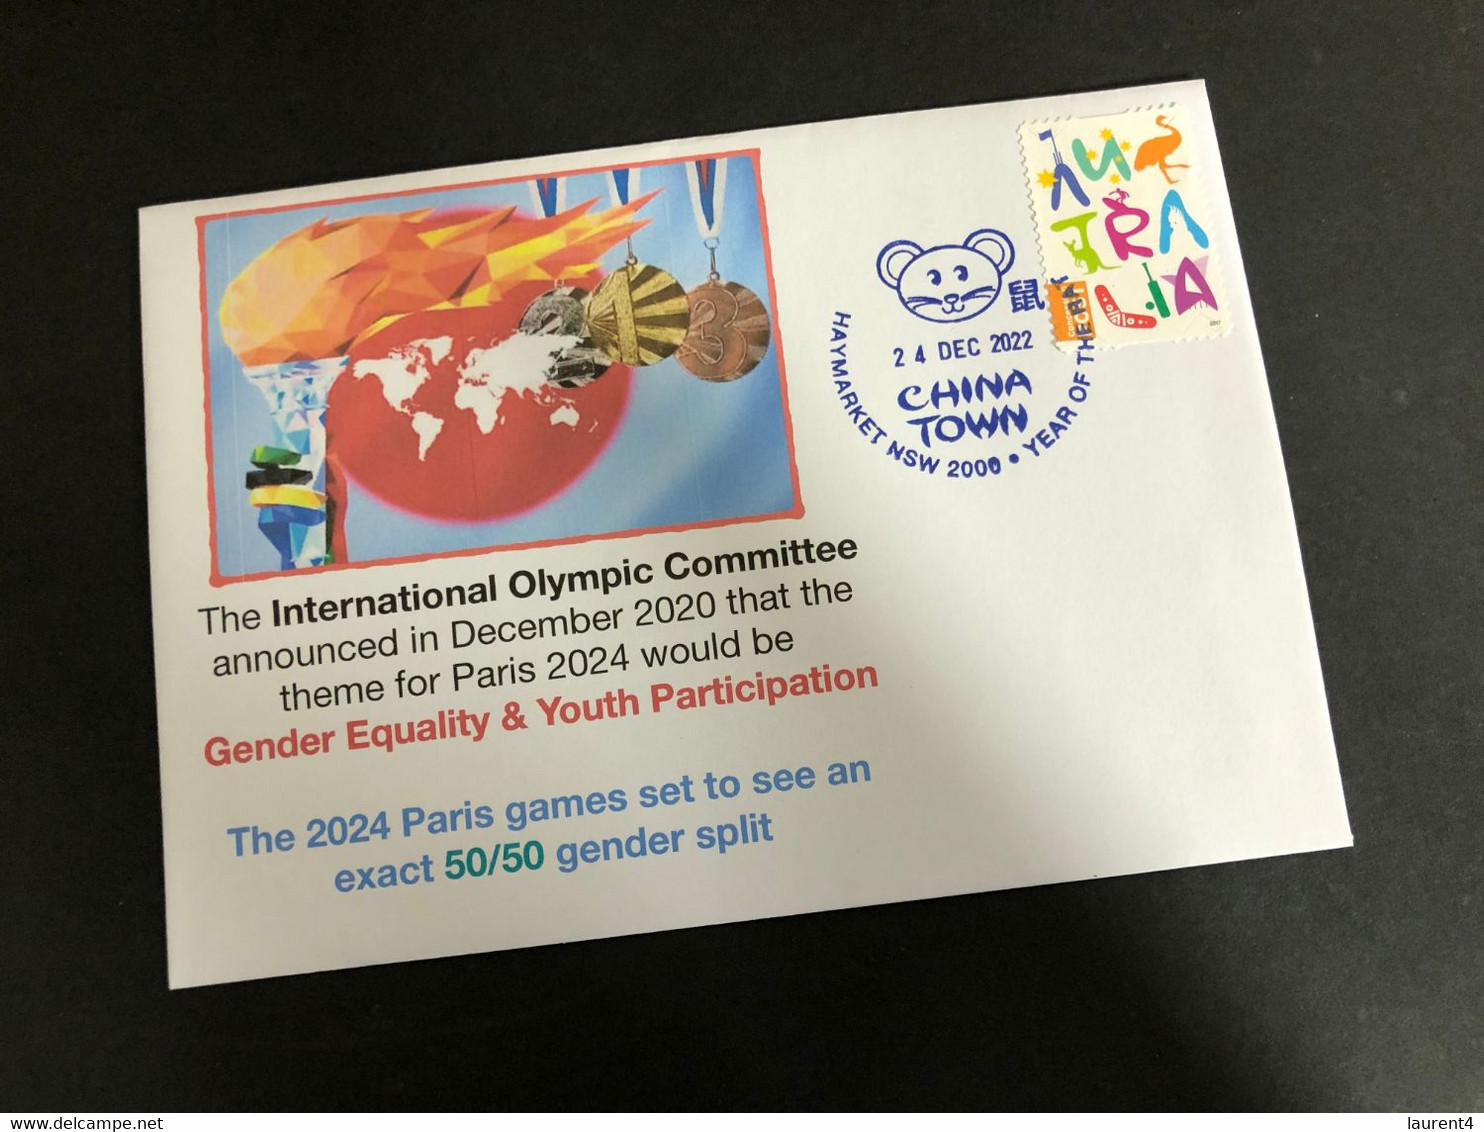 (2 N 8) 2024 France Olympic Games - Gender Equality & Youth Participation Anounced Theme Of The Paris Games (24-12-2022) - Sommer 2024: Paris